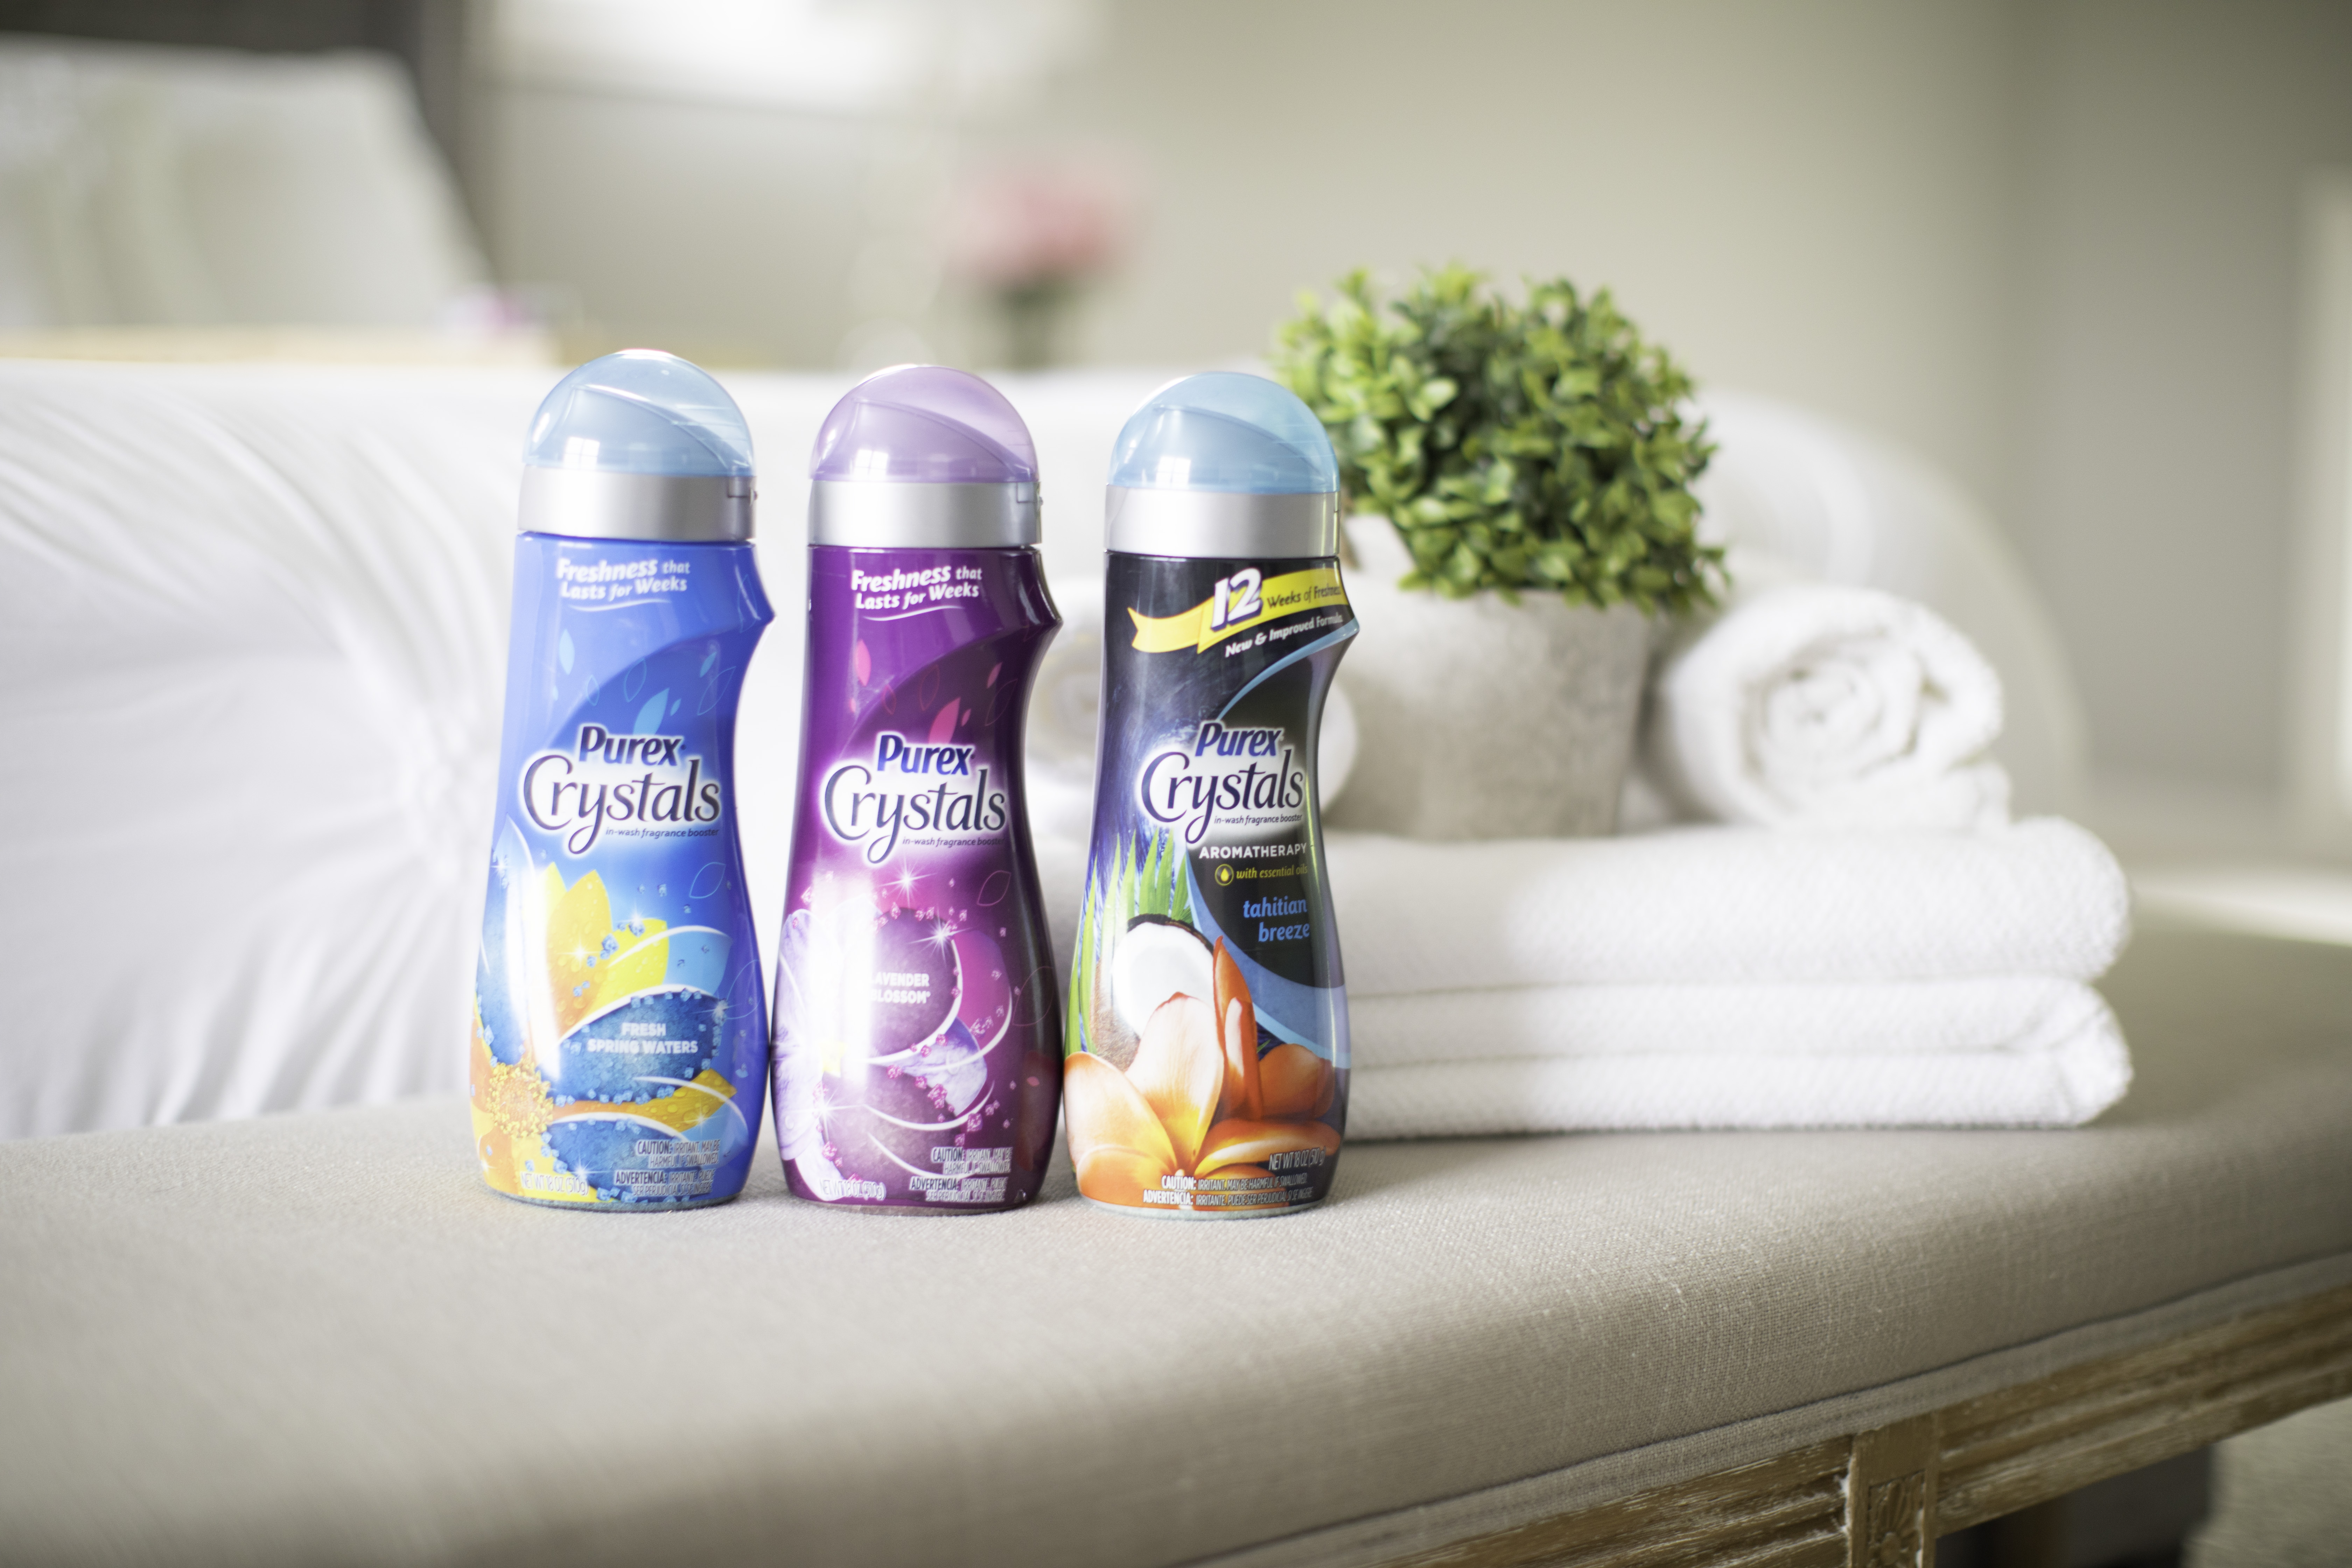 how to transform your bedroom into a calm sanctuary, purex, Purex Crystal Fresh, collective bias campaign, ad